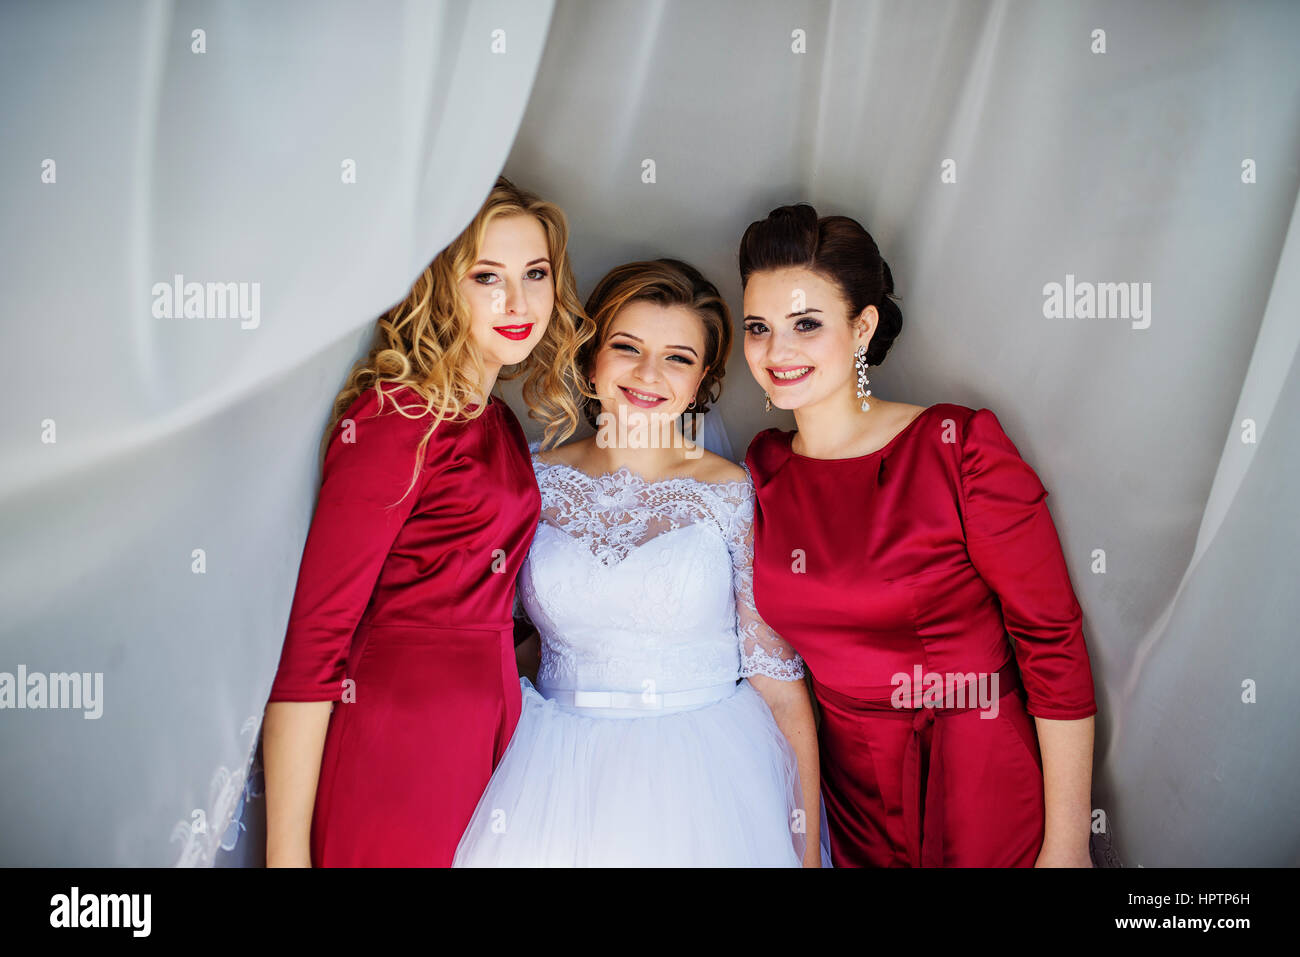 Cute blonde bride with bridesmaids posed on curtains at wedding morning day. Stock Photo